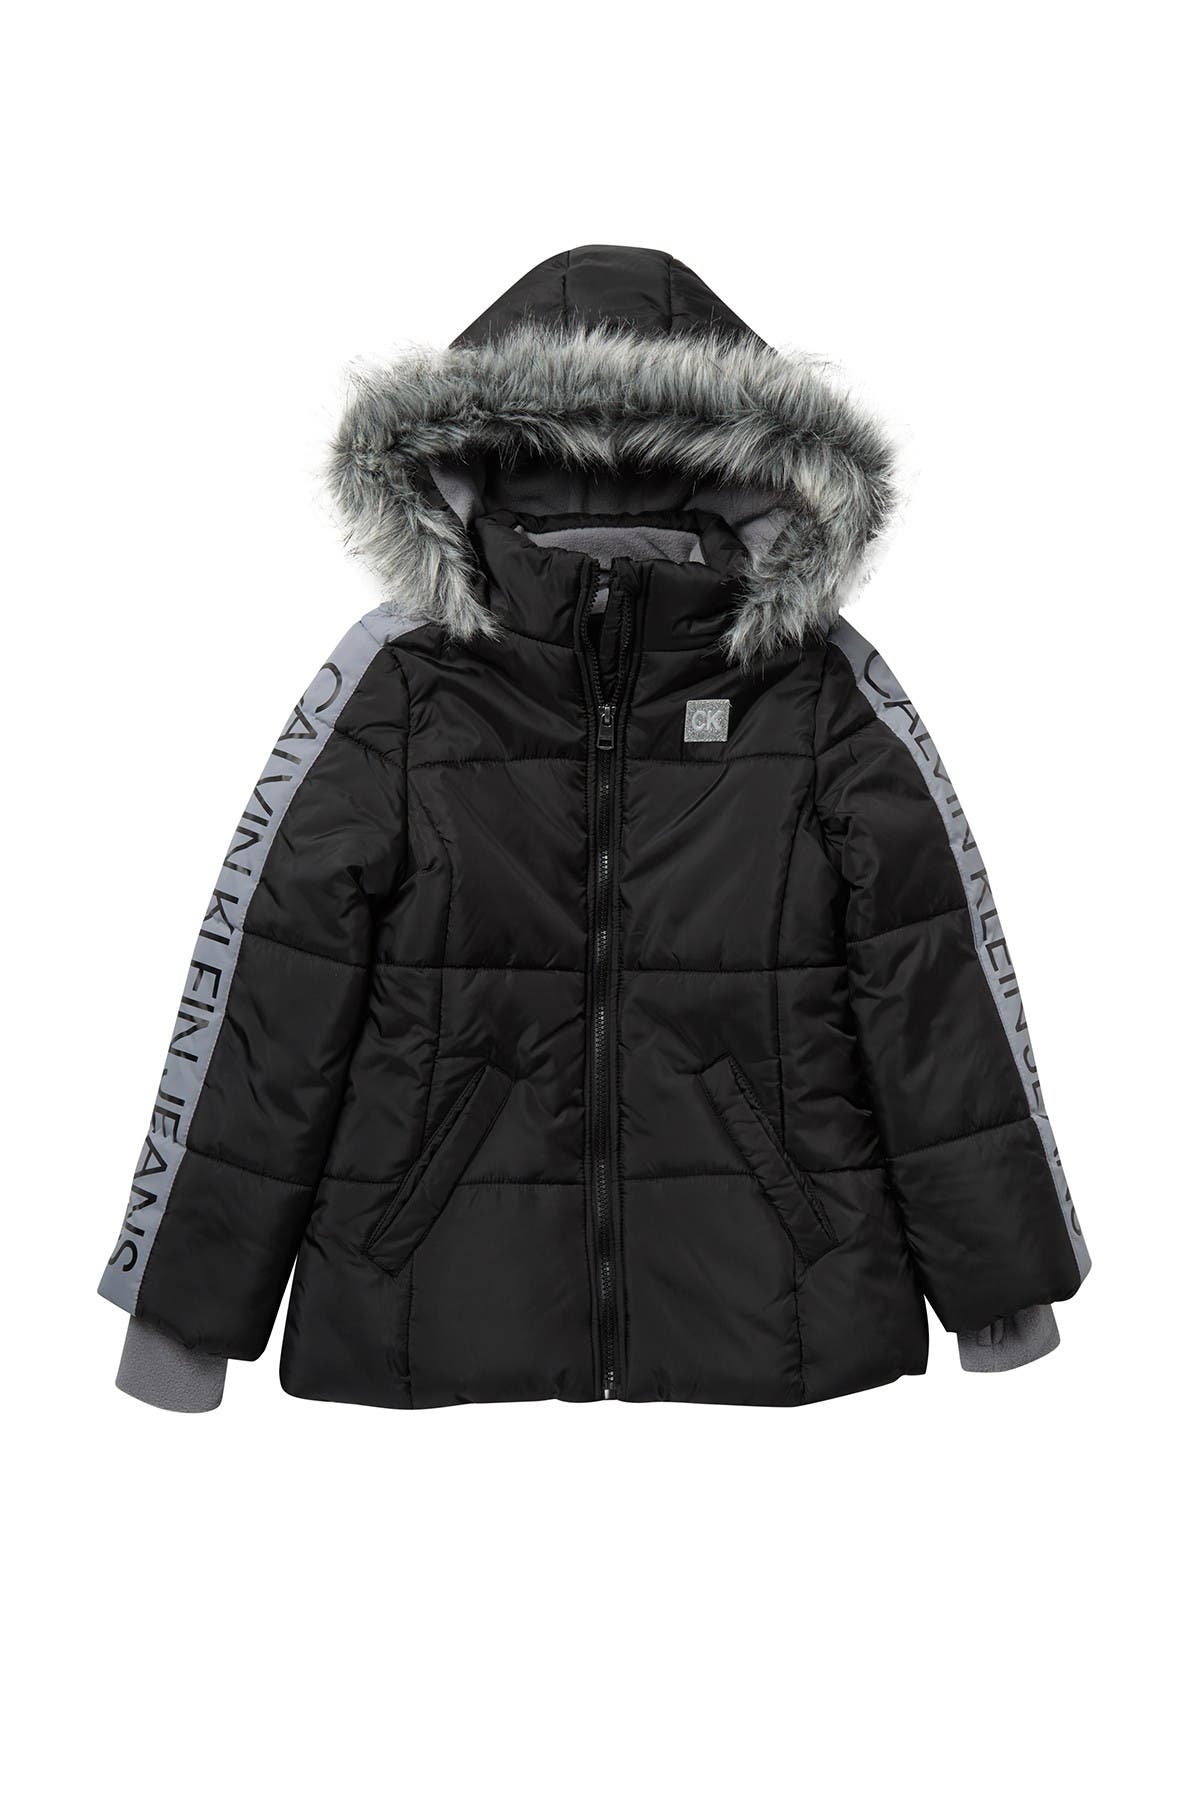 calvin klein performance puffer jacket with knit sleeves